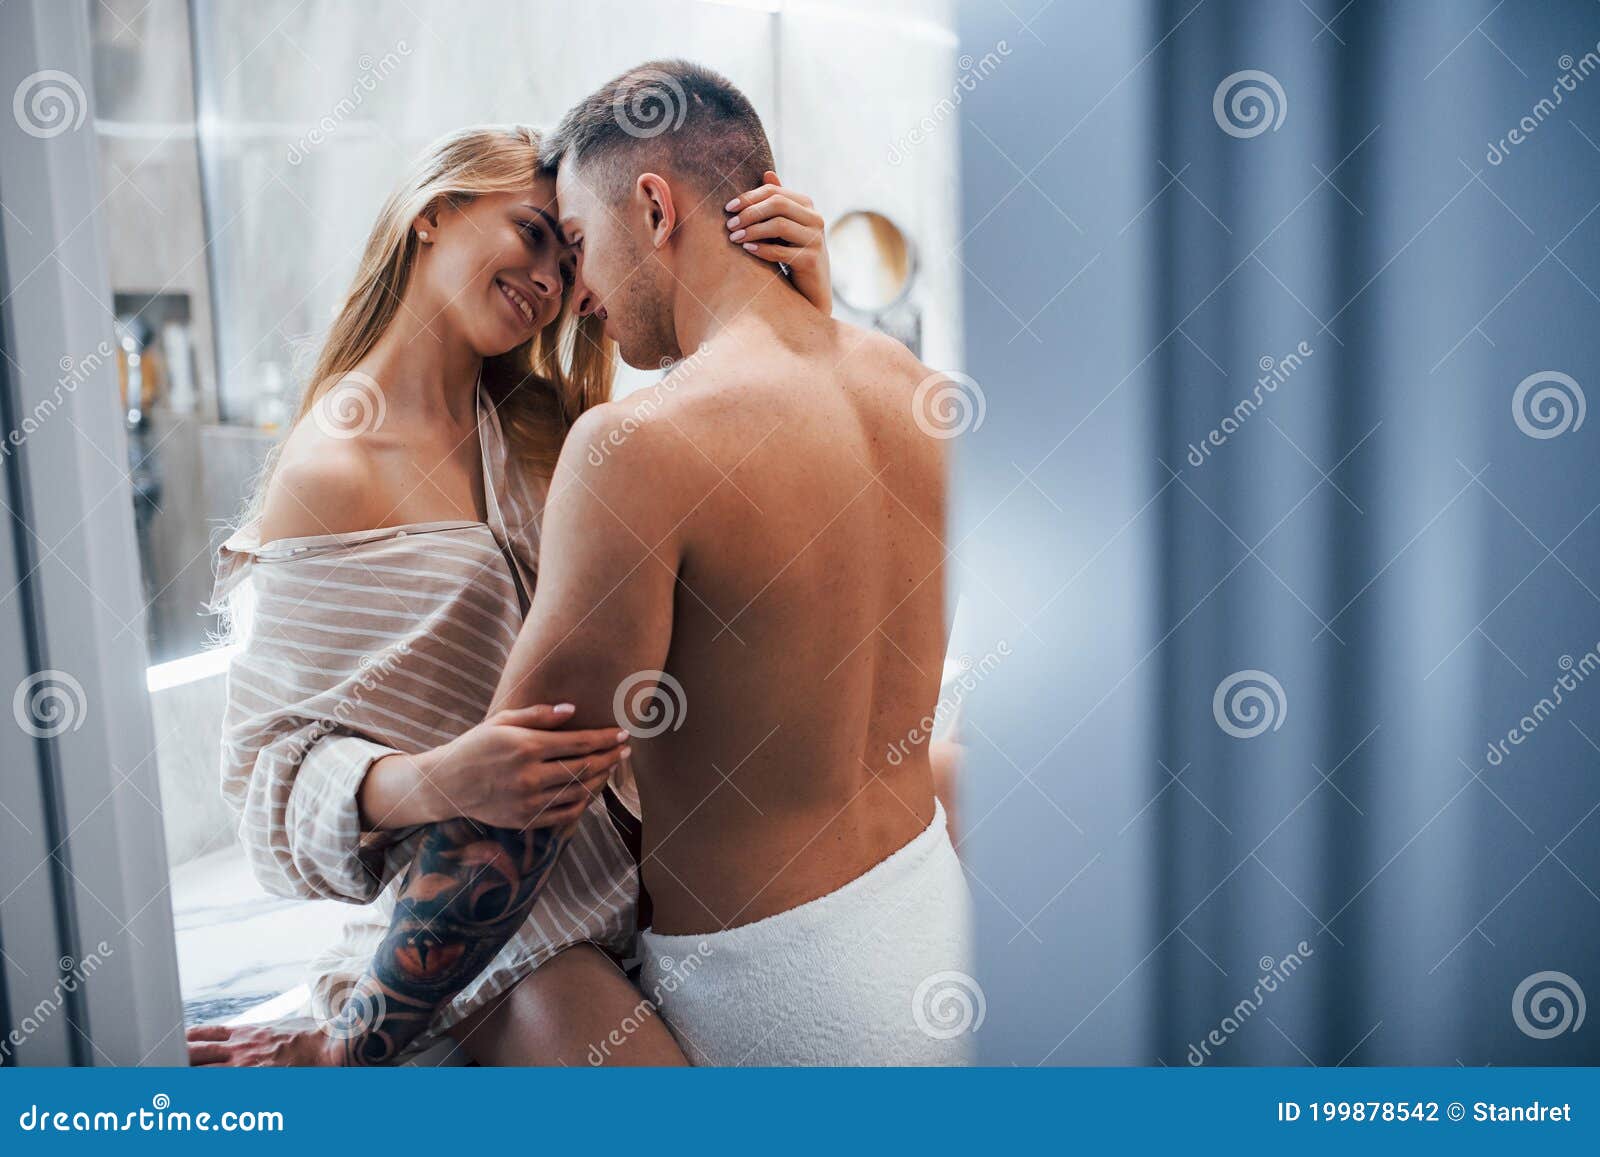 Coolest Romantic Sex in the Bathroom by a Sexy Couple